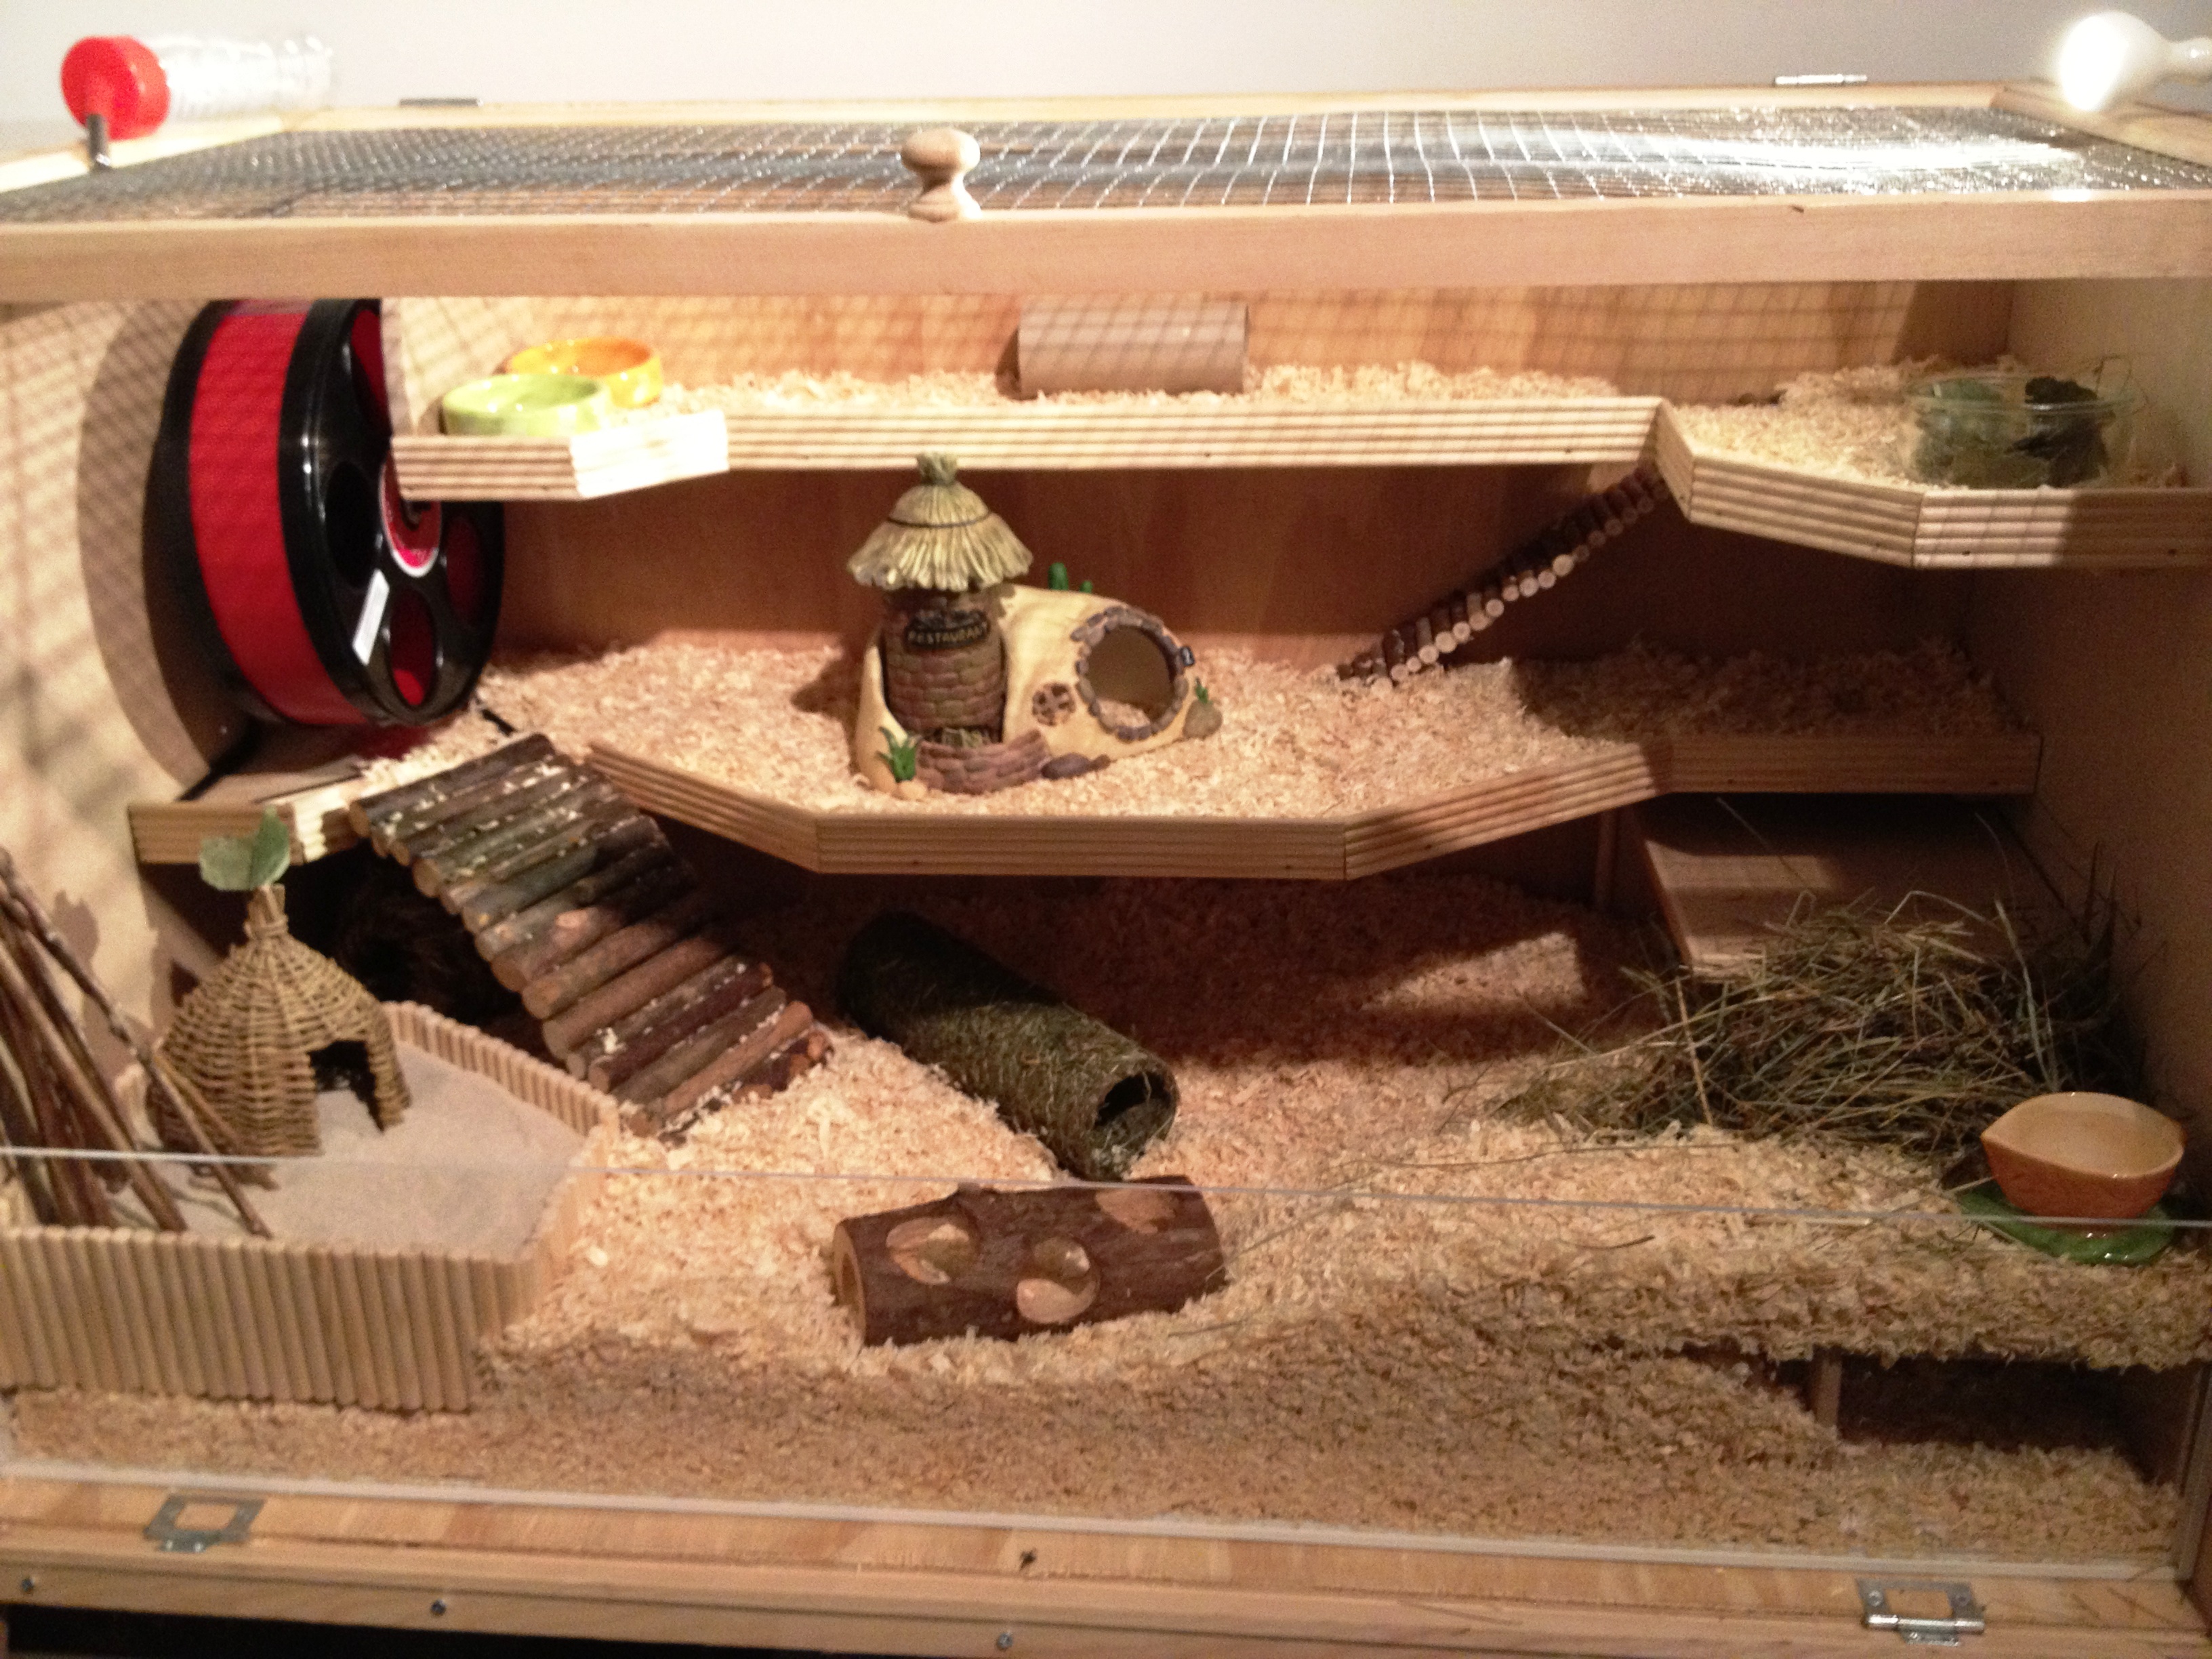 36 thoughts on “ Build your own hamster cage – photo guide ”